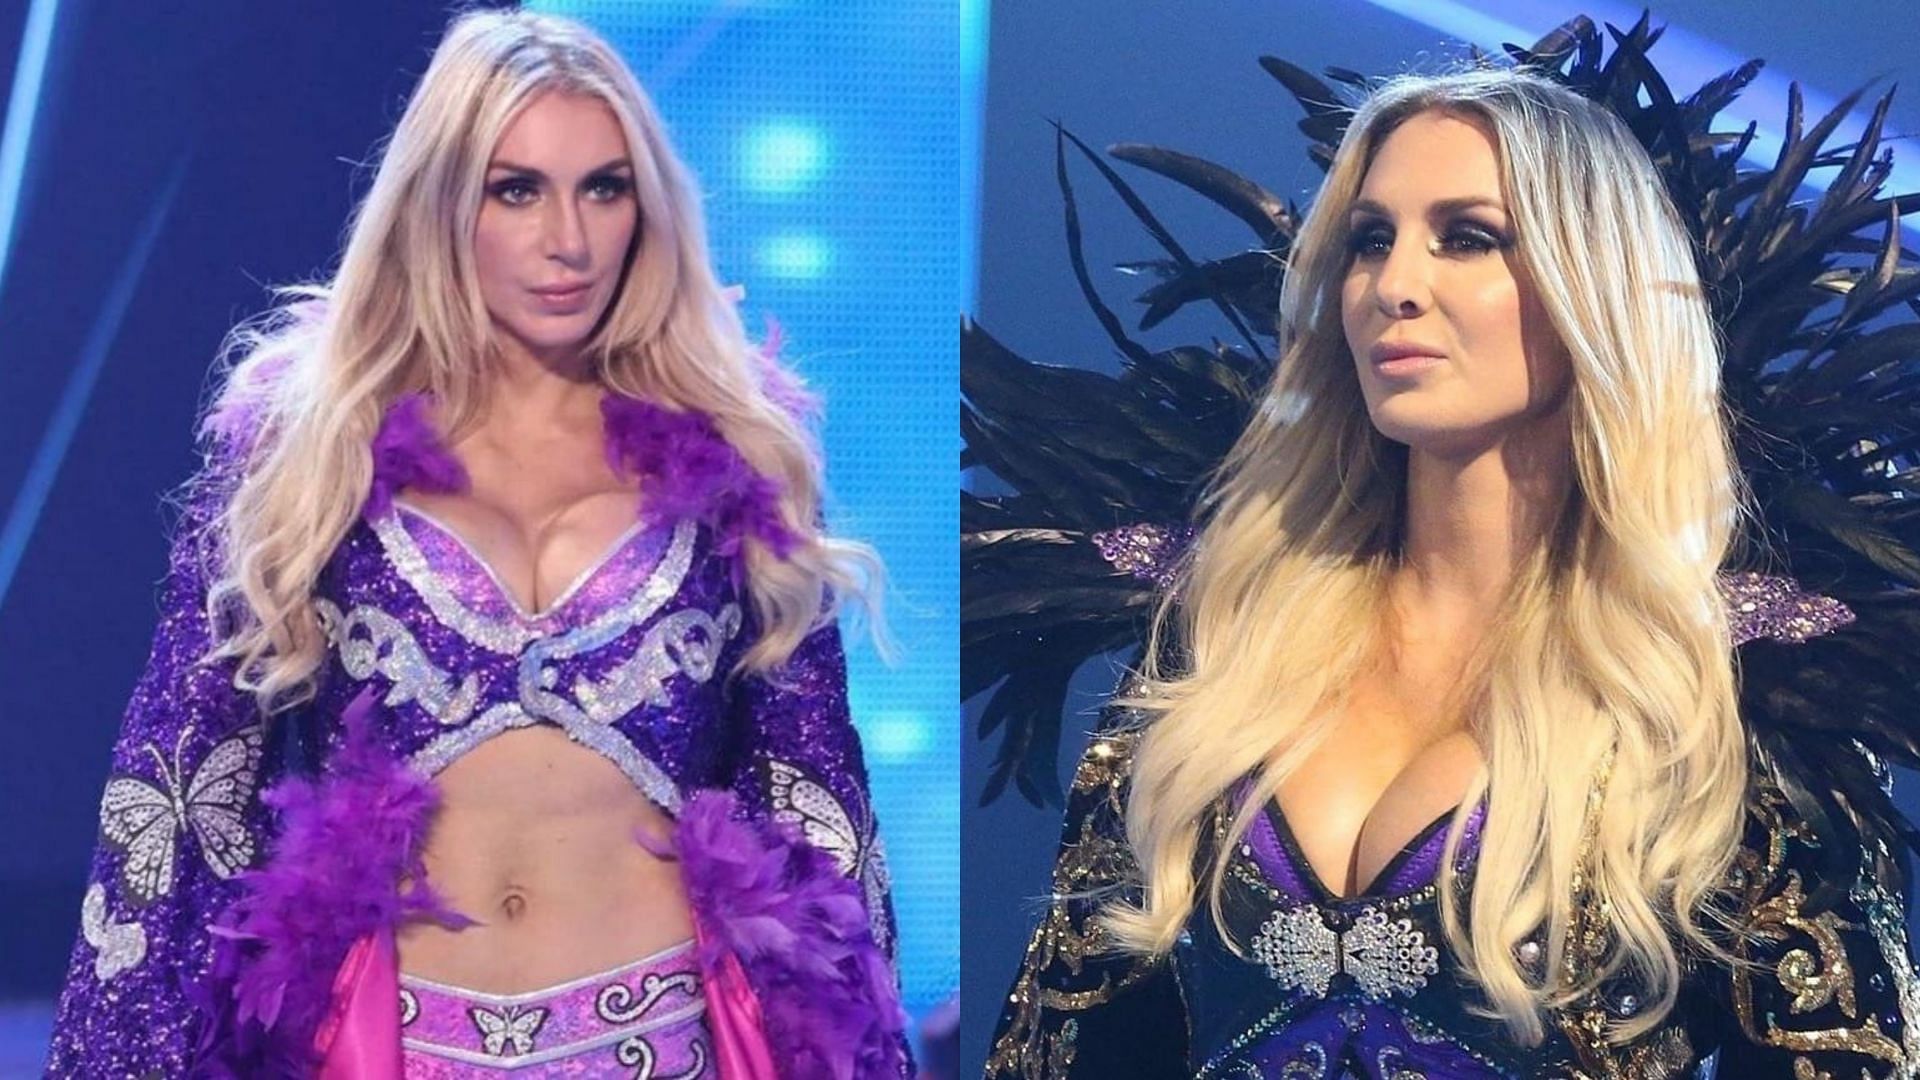 Charlotte Flair had several problems with her breast implants